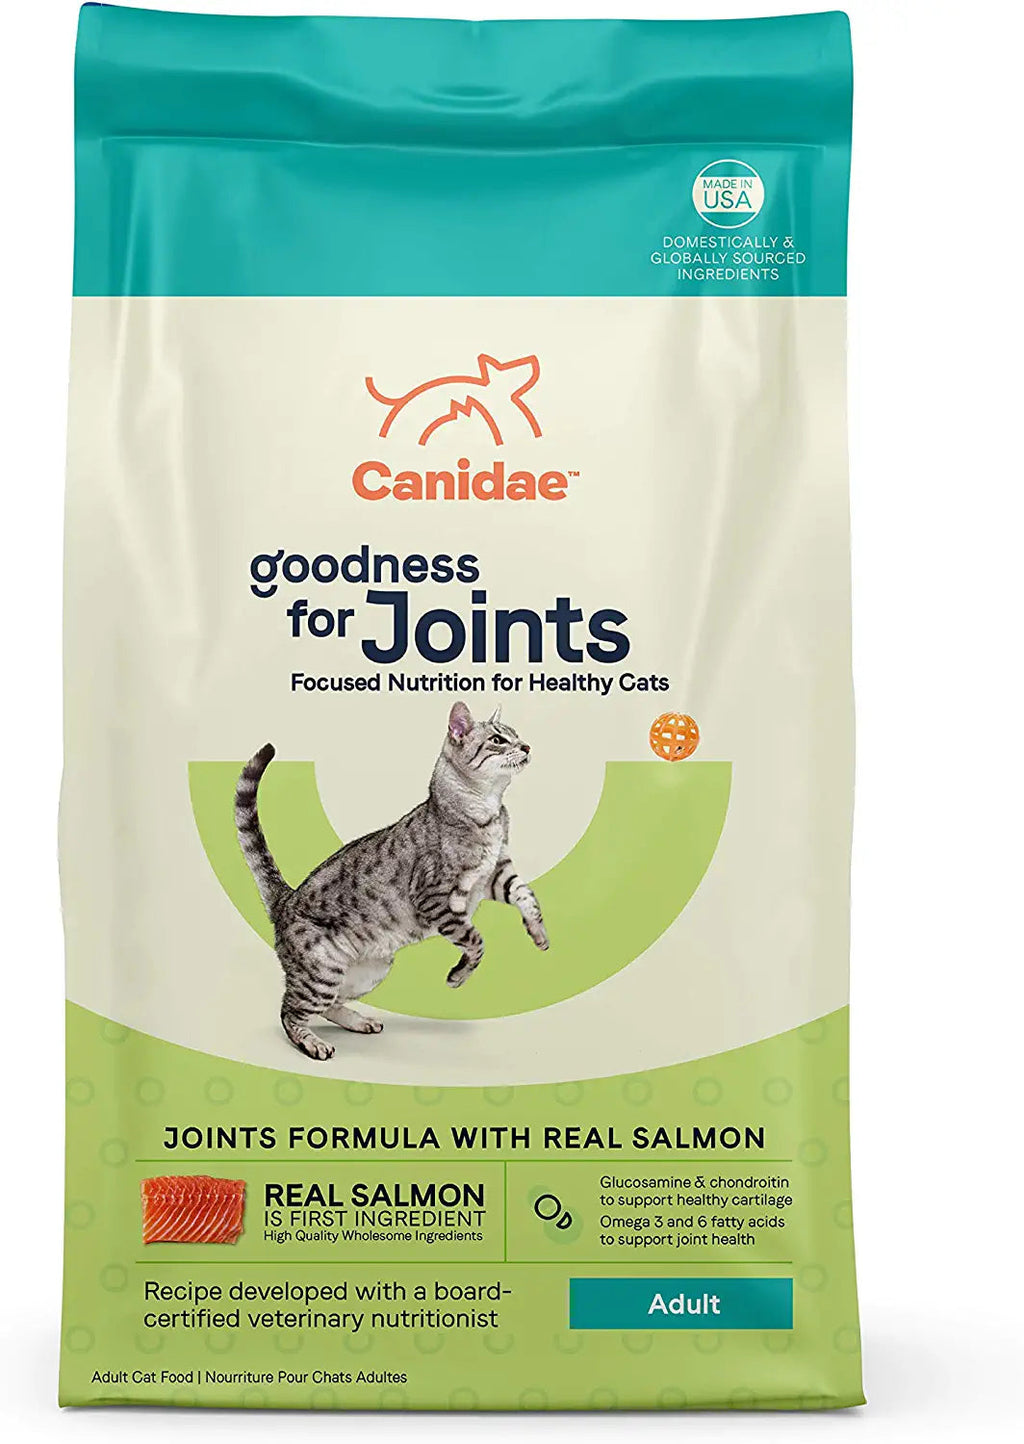 Canidae Goodness for Joints Formula Dry Cat Food - Salmon - 5 Lbs  